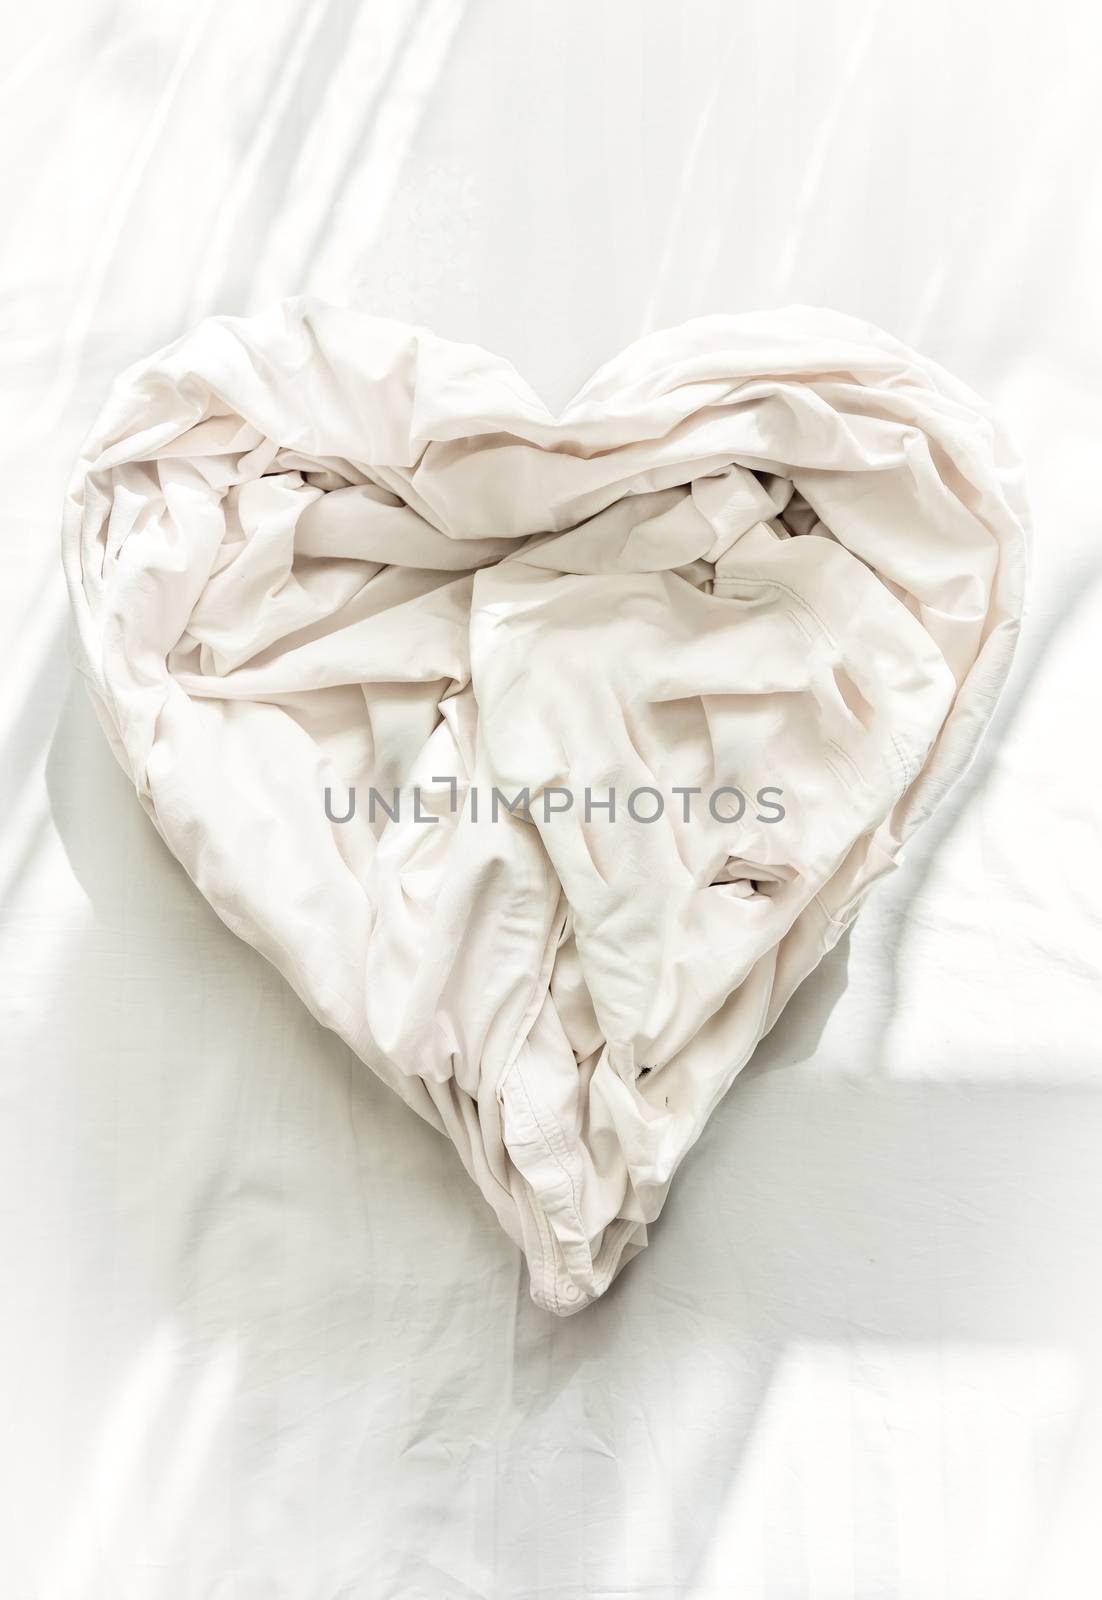 Photo of bed sheet in shape of heart